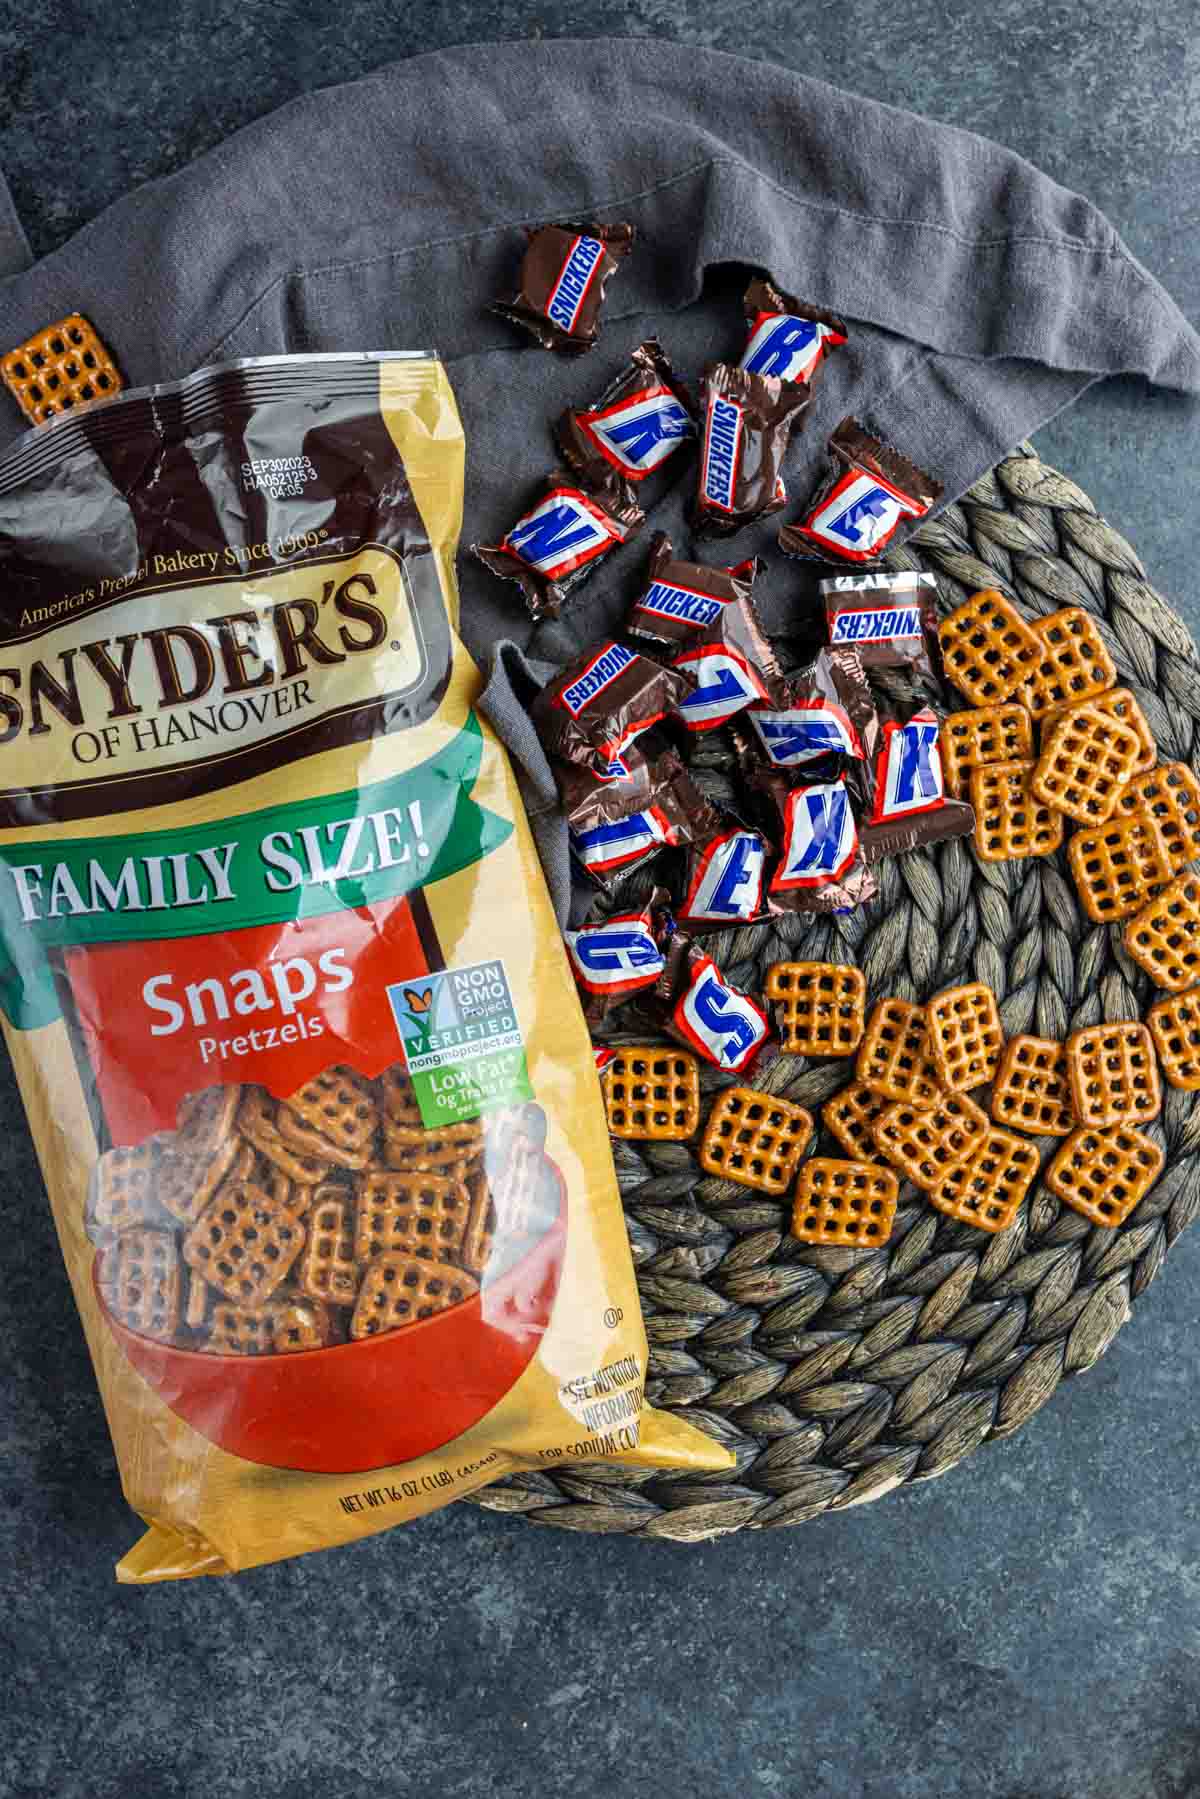 A bag of snyder's family snap pretzels next to Snicker bite size pieces to make Snickers Pretzel Bites